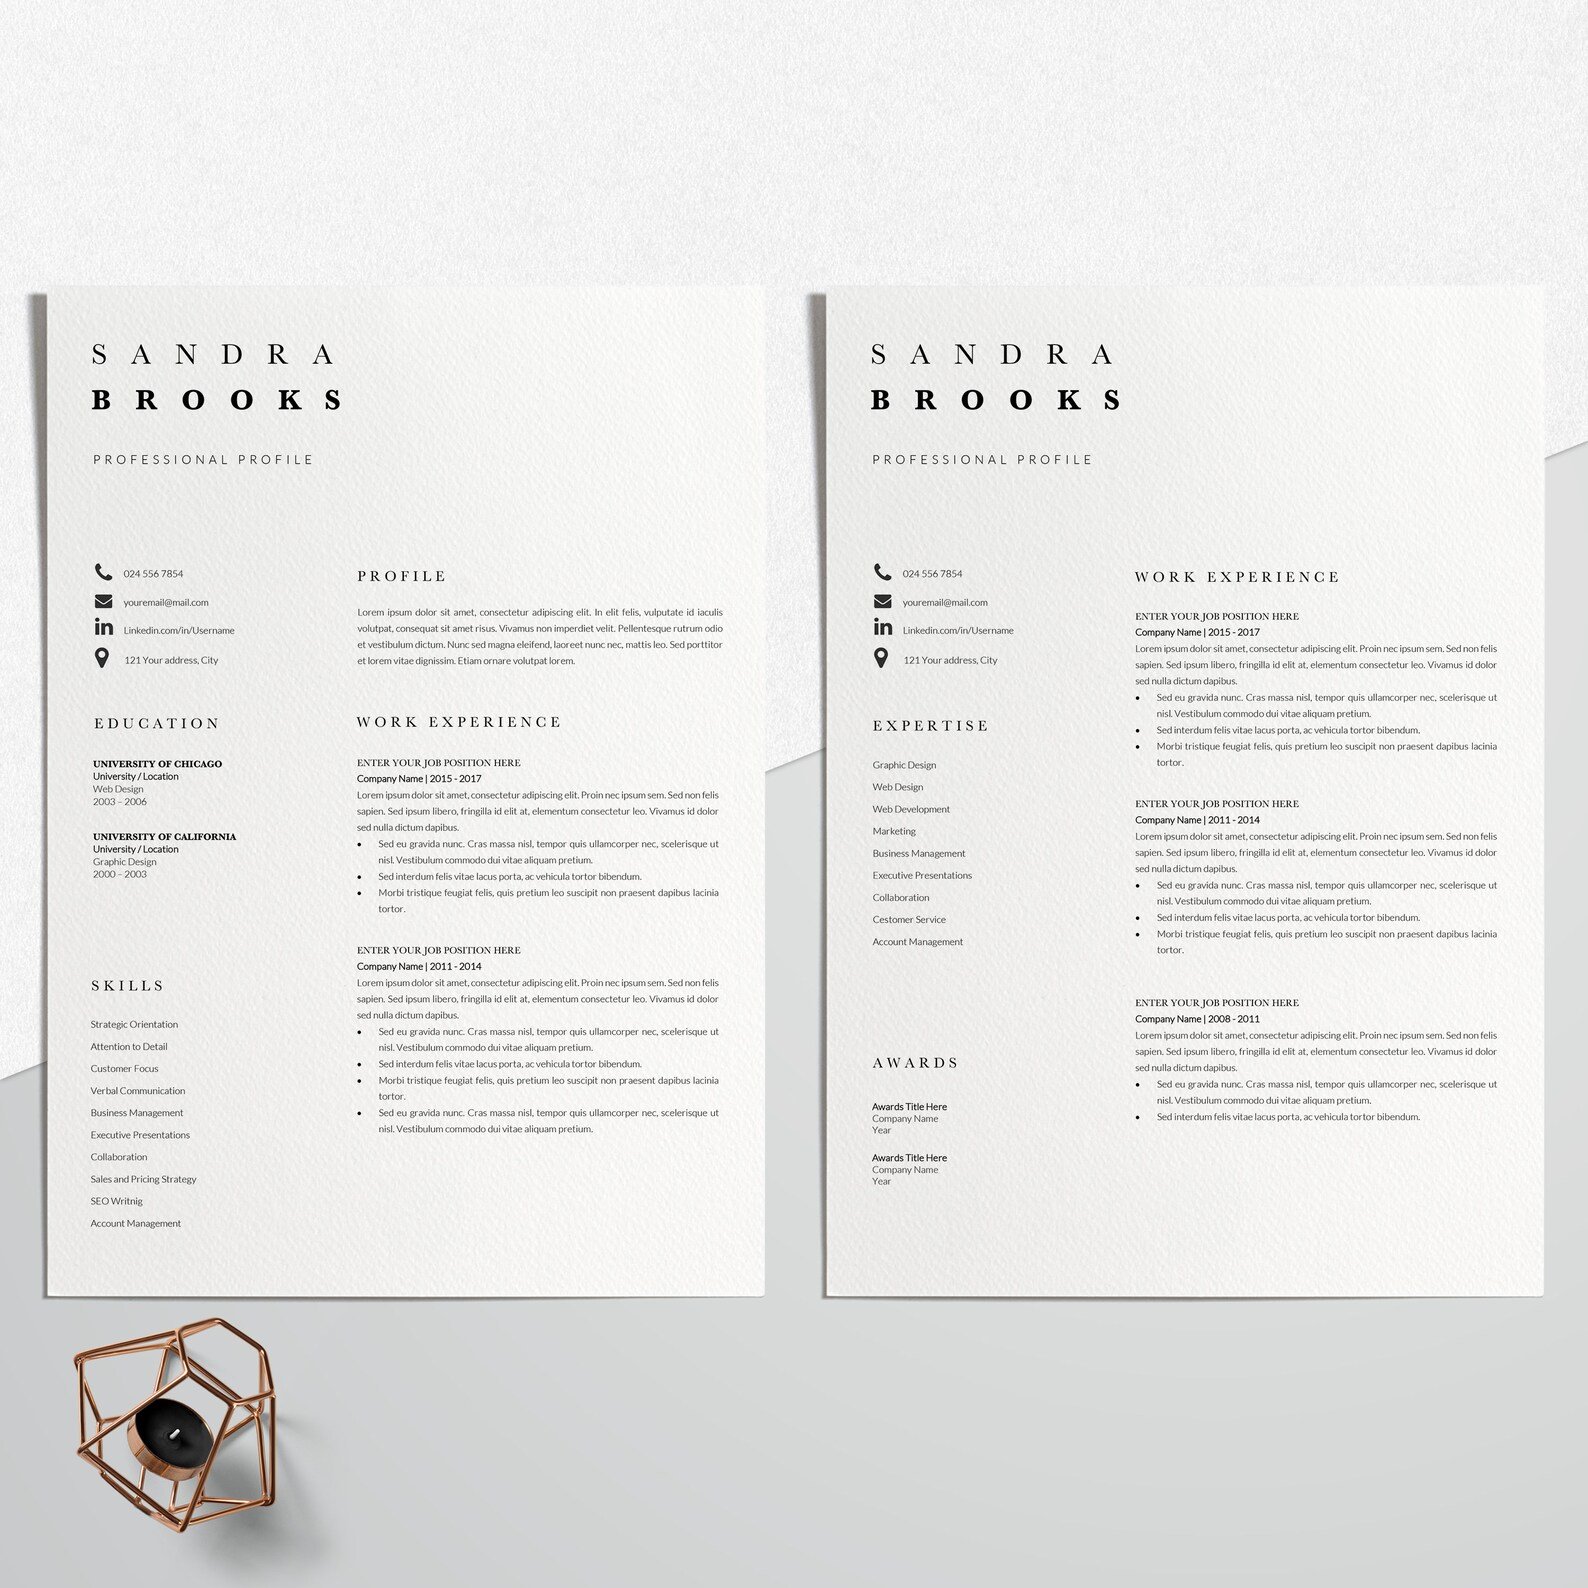 Two resumes on a table next to a cup of coffee.